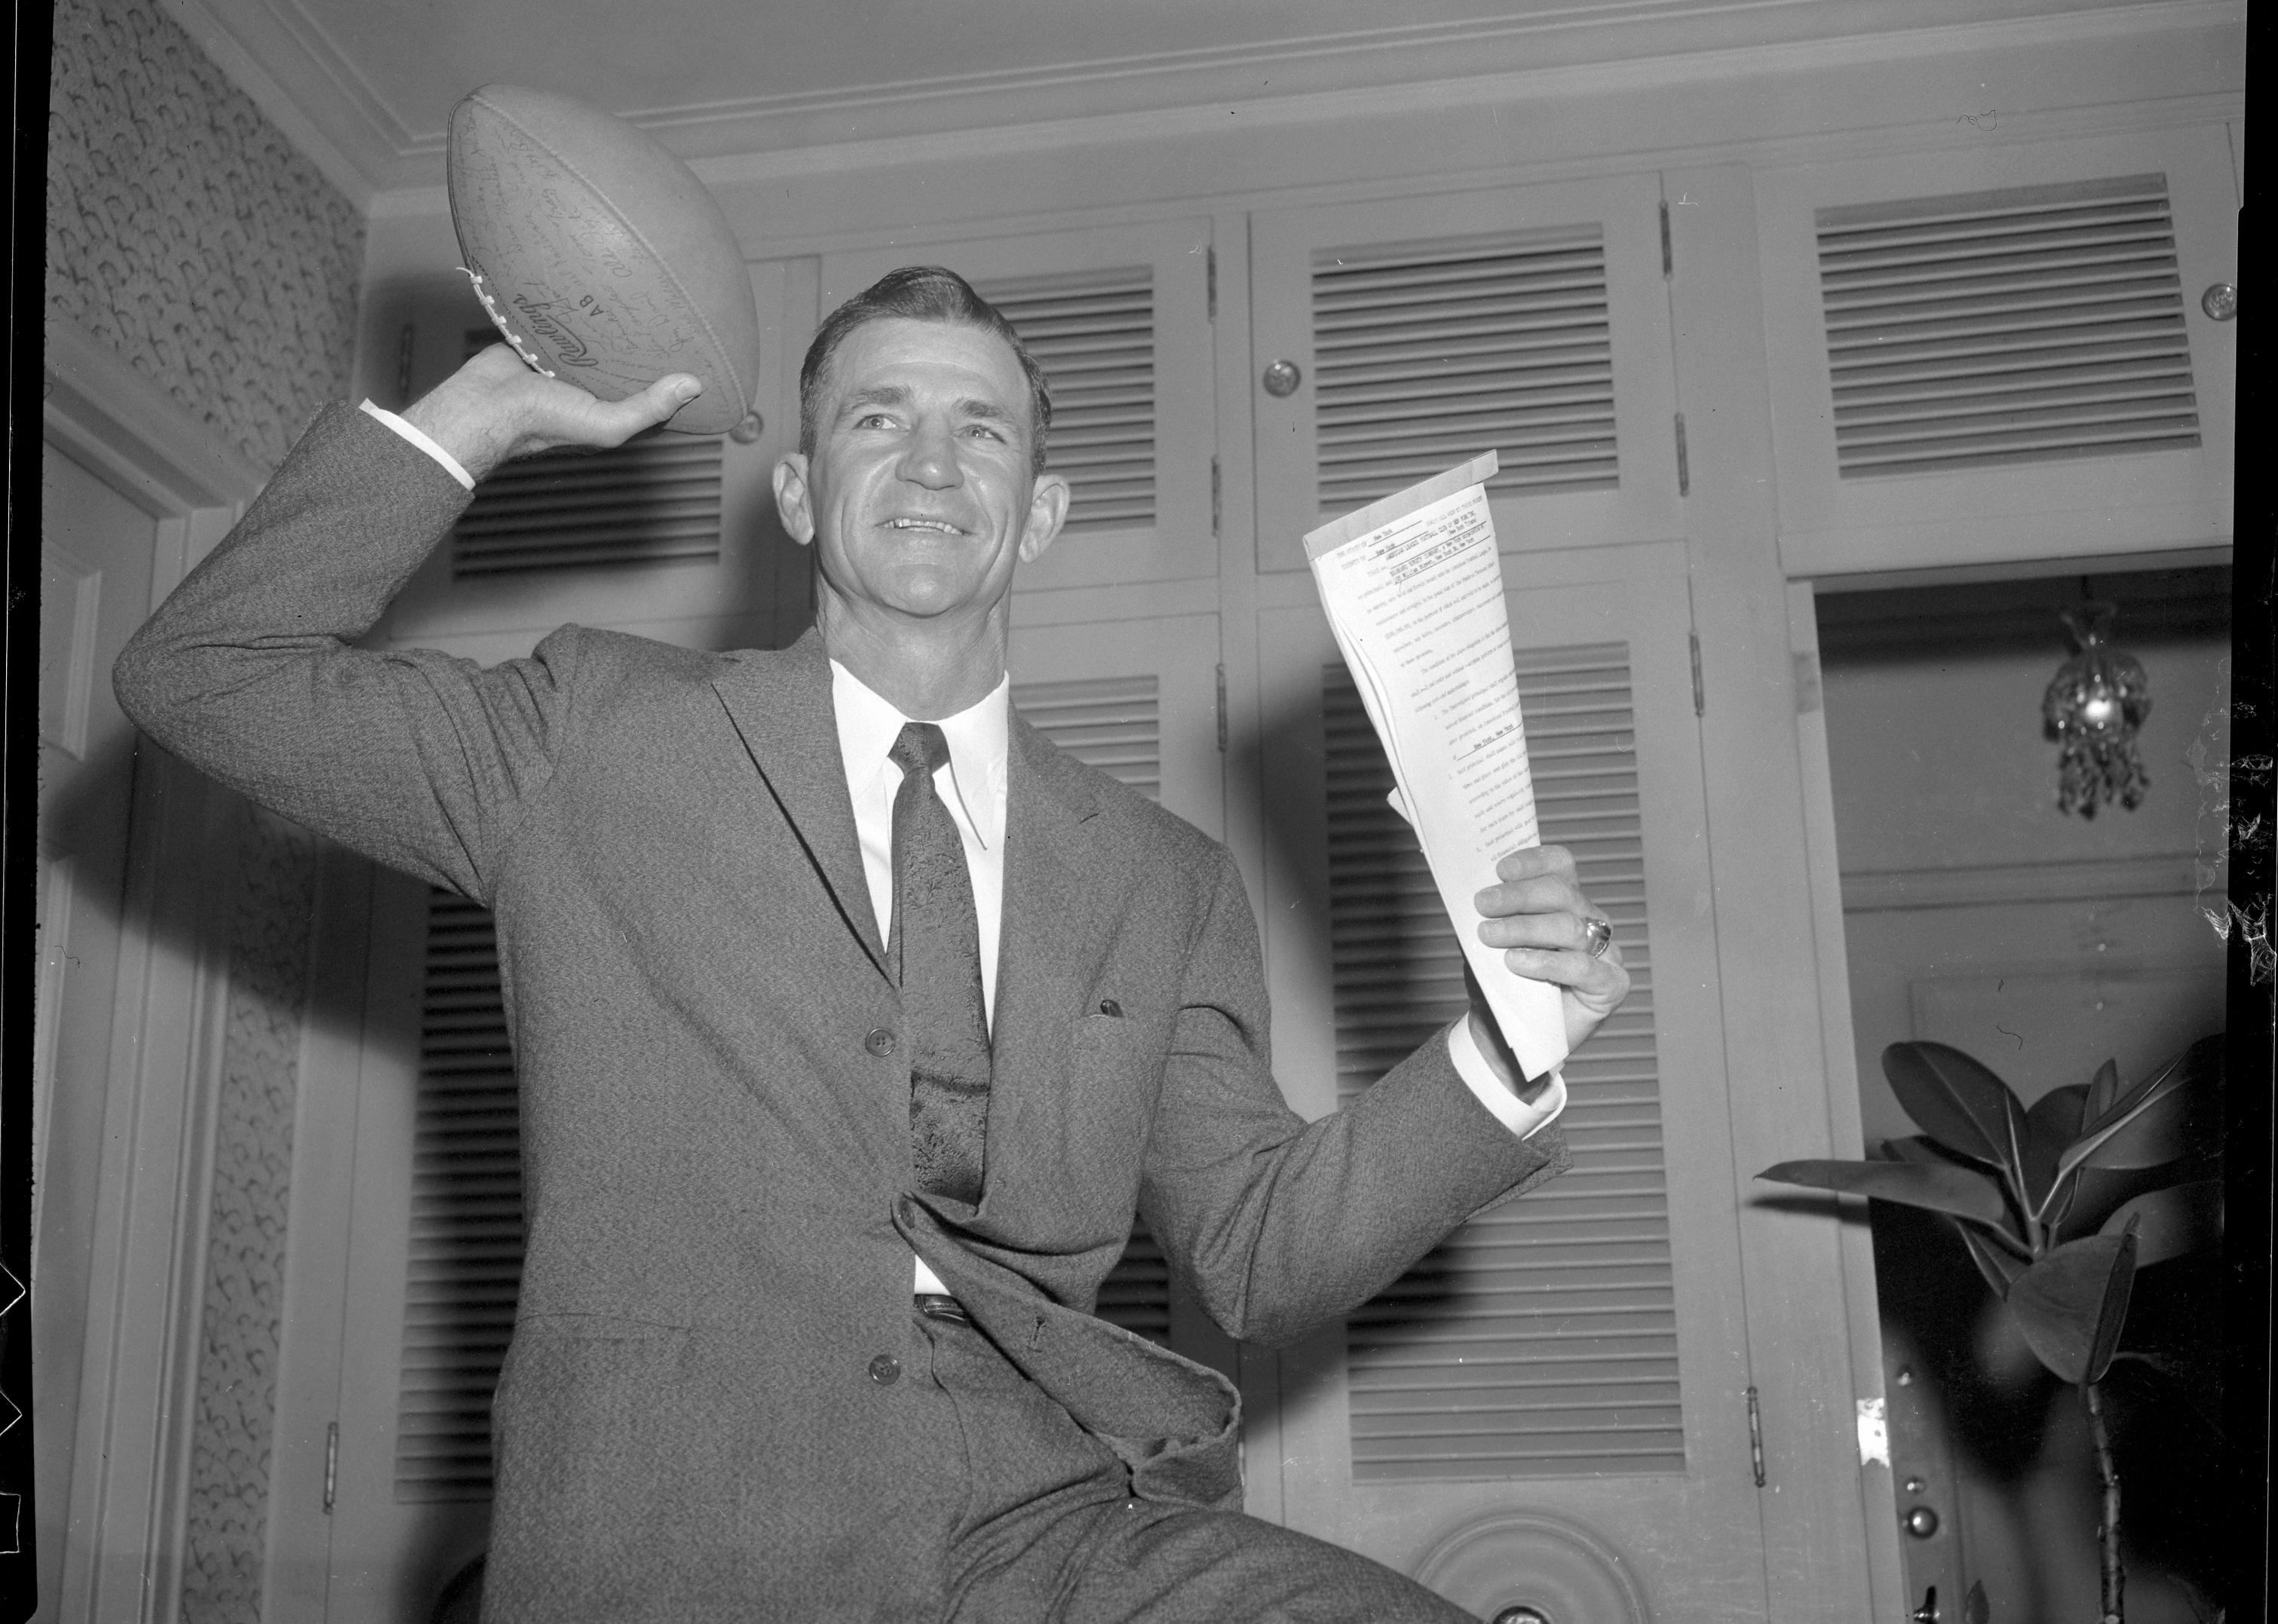 A contract and a football in hand, Sammy Baugh celebrates being named head coach of the New York Titans in the American Football League.